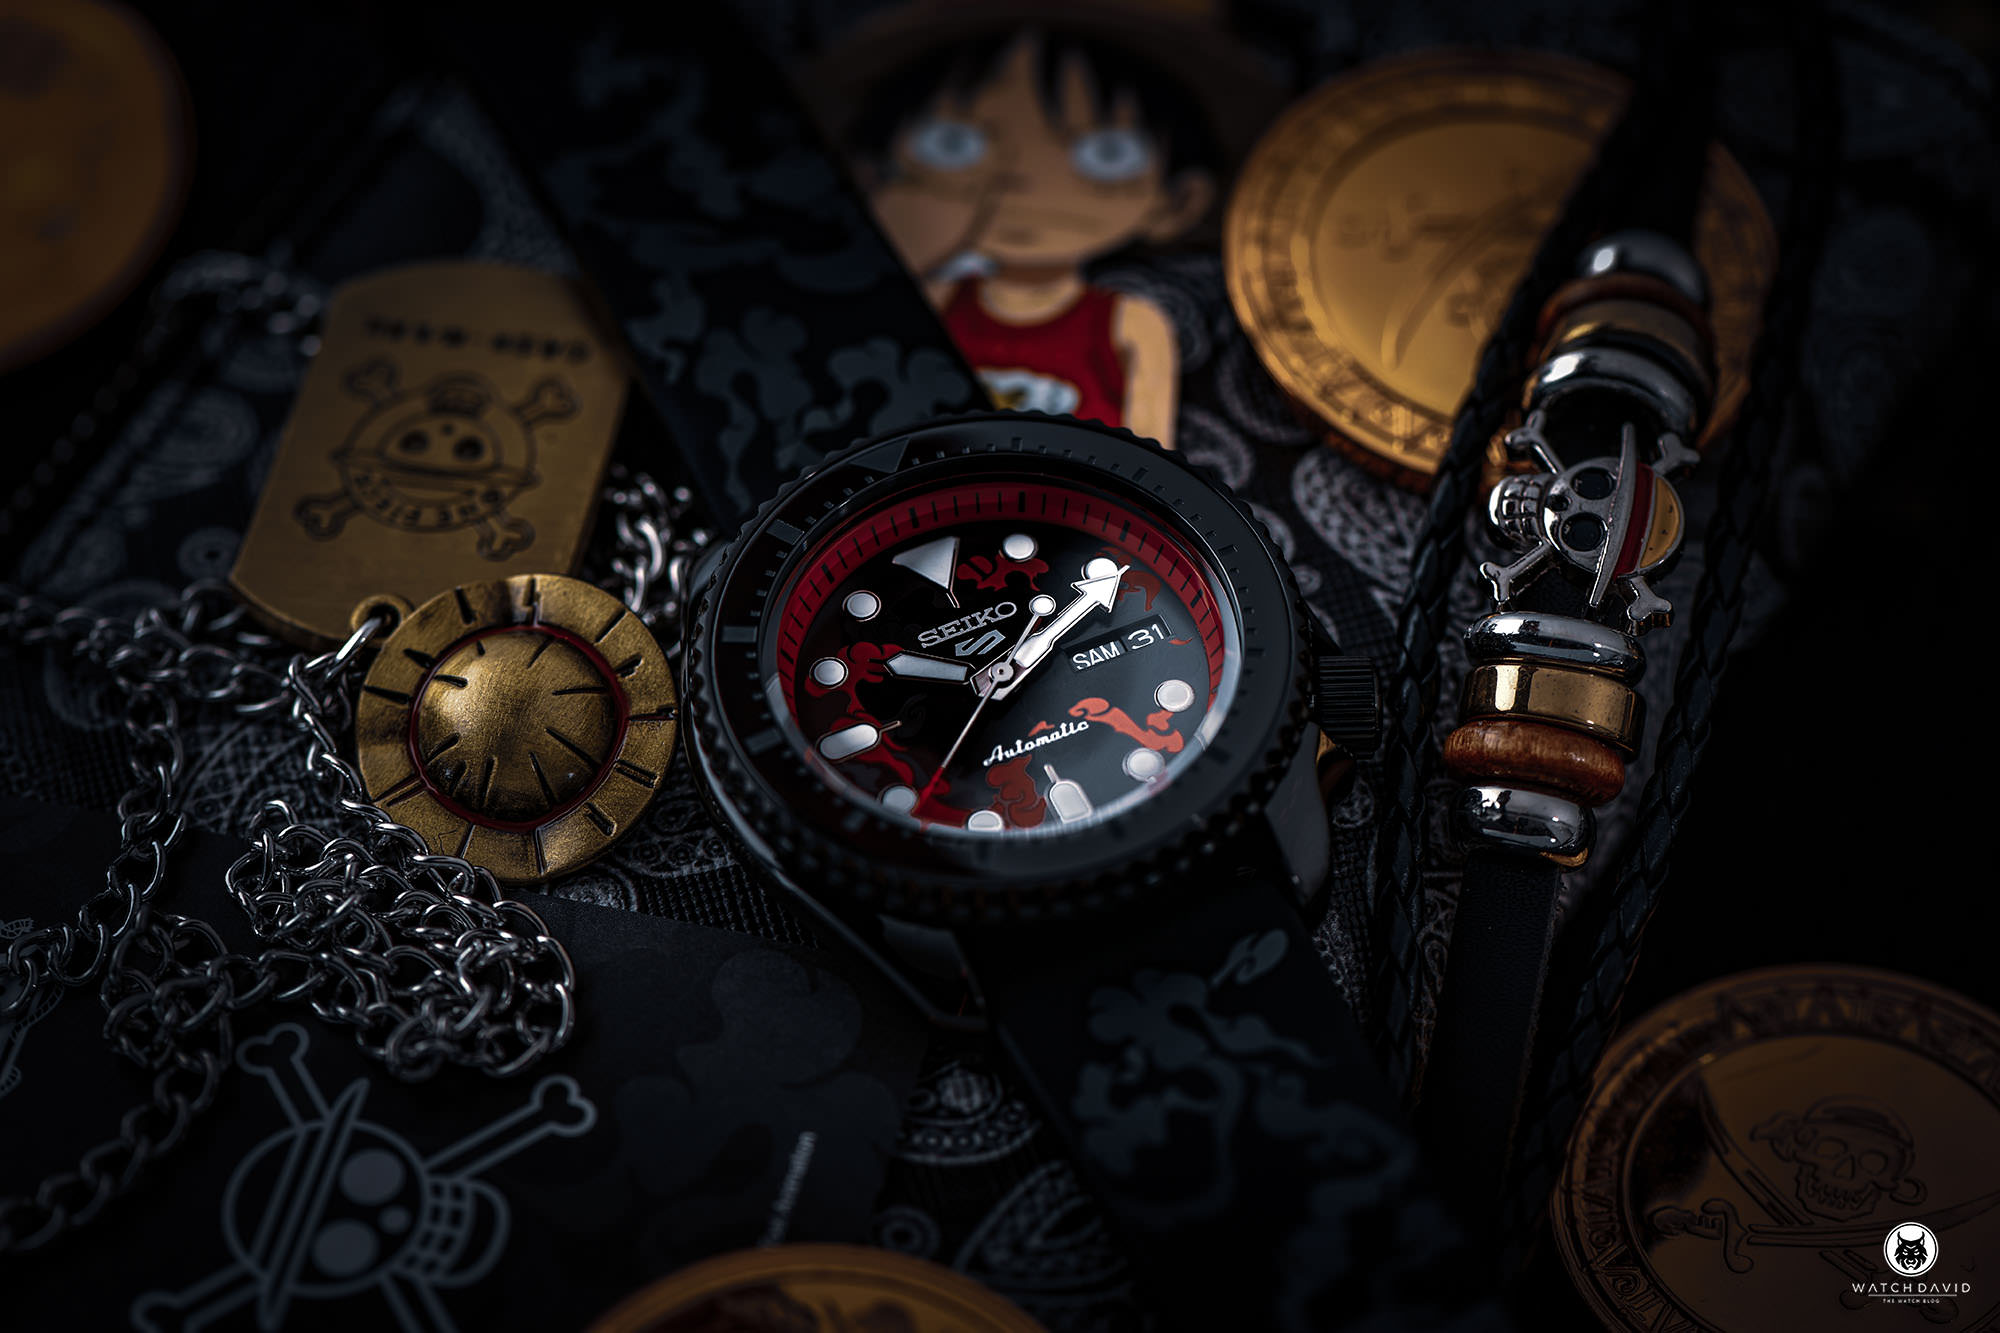 One Piece Gear 5 Watch to Release in Collaboration With Seiko